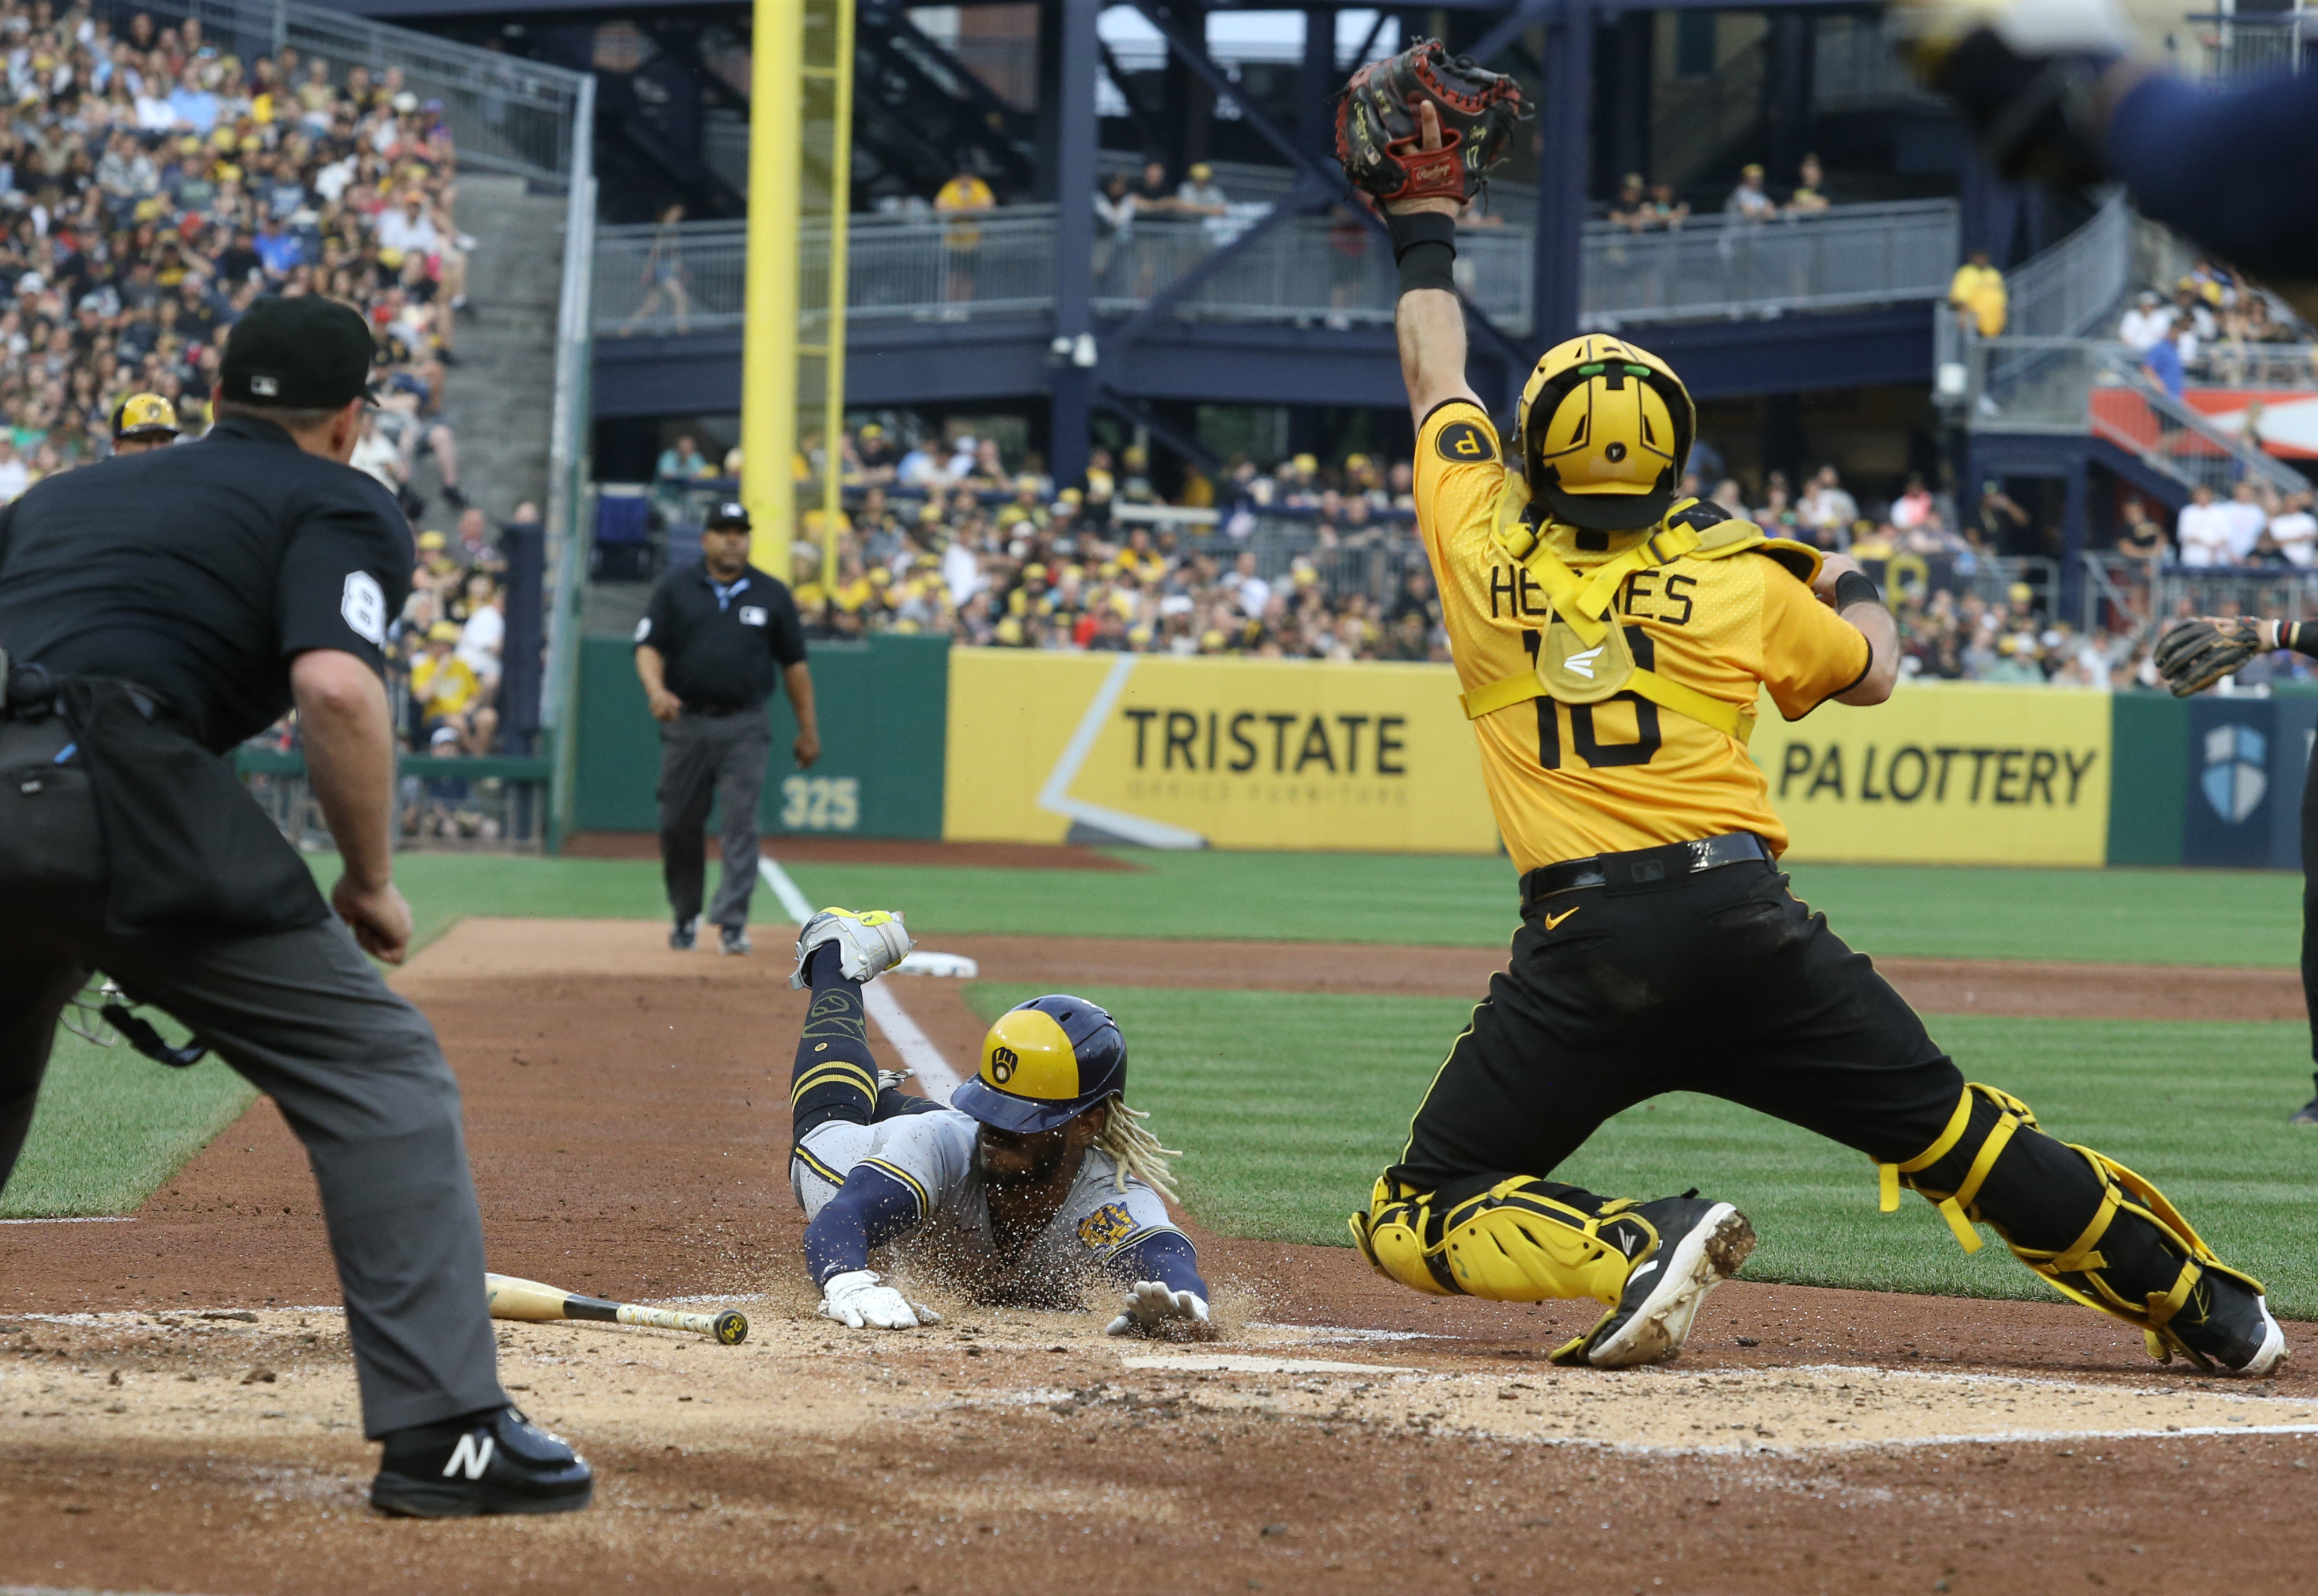 Carlos Santana's walk-off HR completes Pirates' rally past Brewers